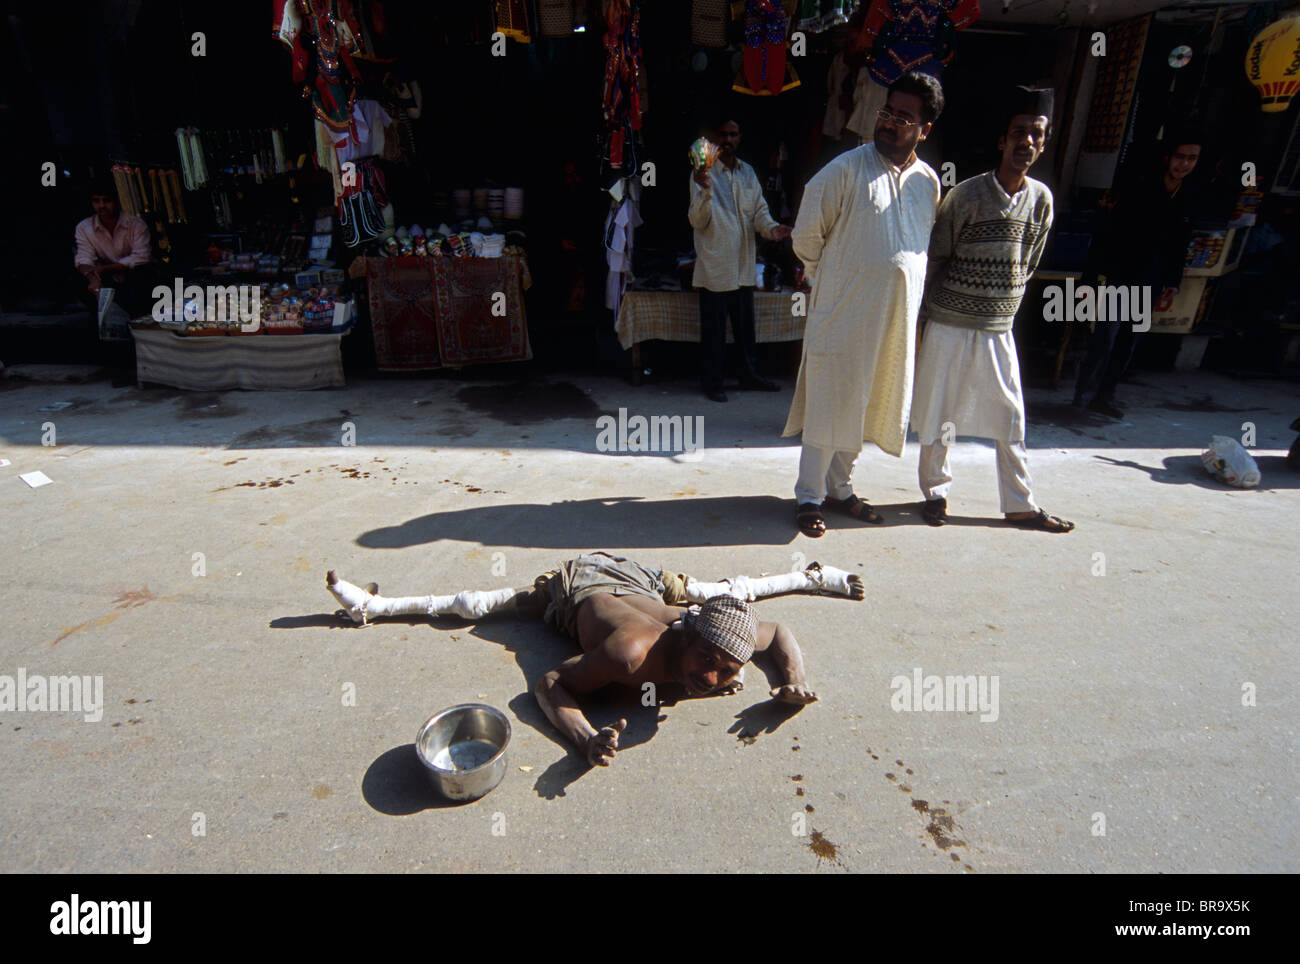 Disabled beggar lying on a street India. Stock Photo